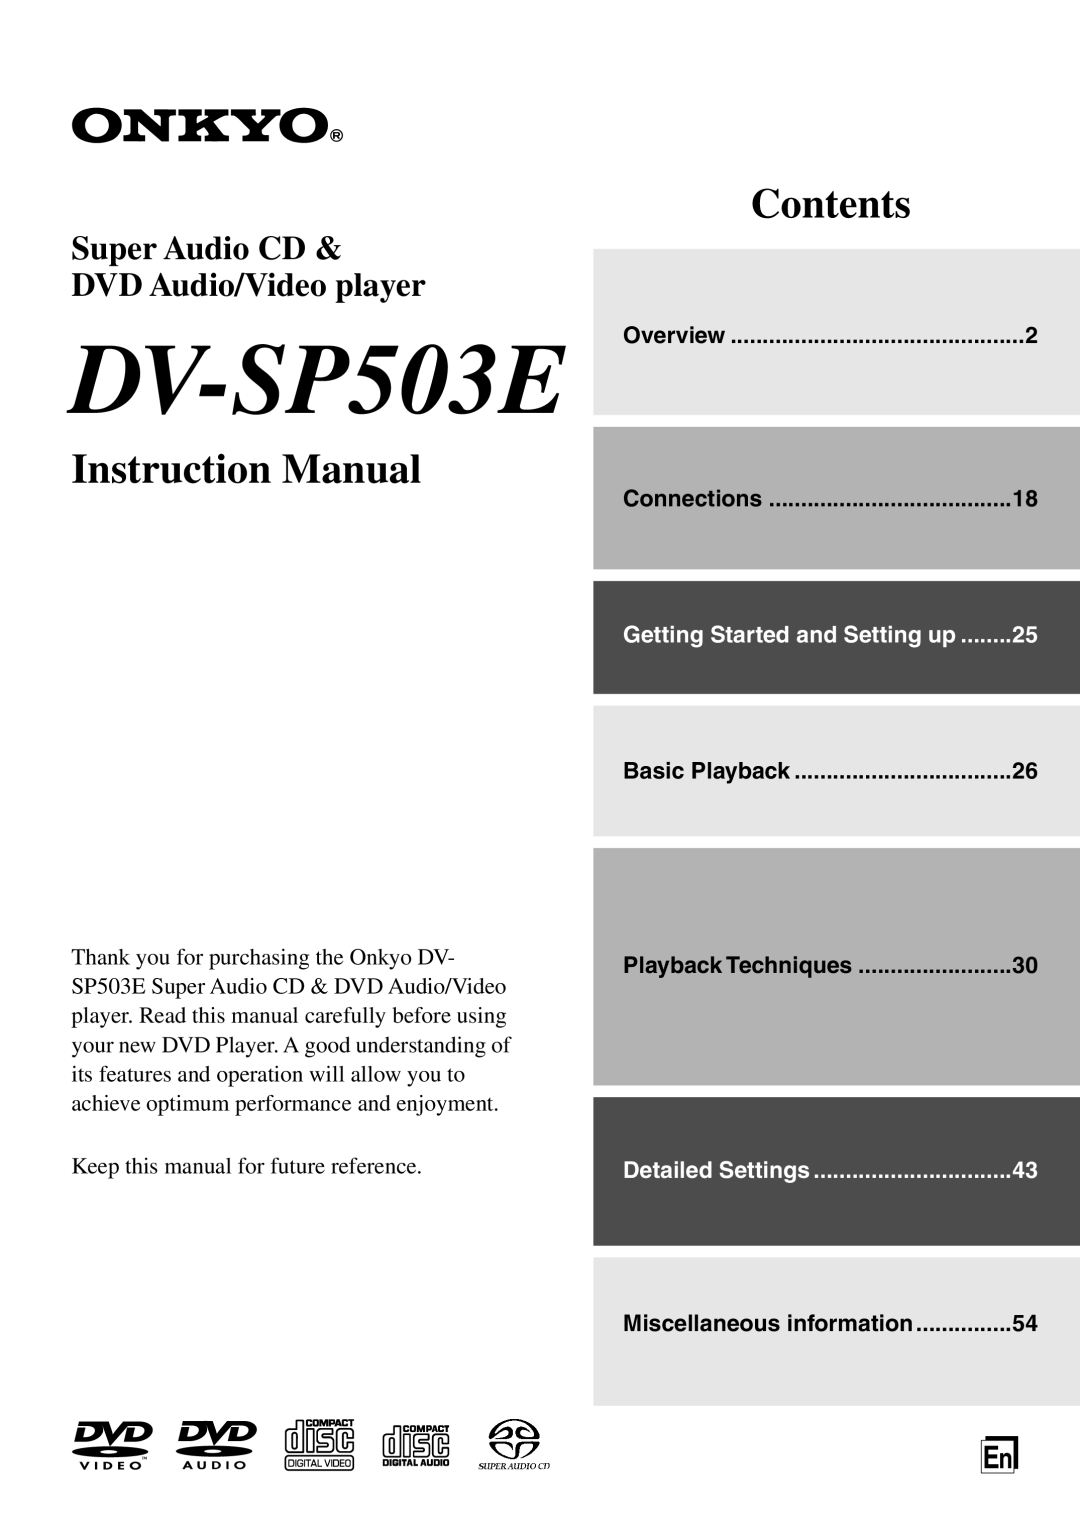 Onkyo instruction manual DV-SP503E Overview, Connections, Basic Playback, Contents, Instruction Manual, Super Audio CD 